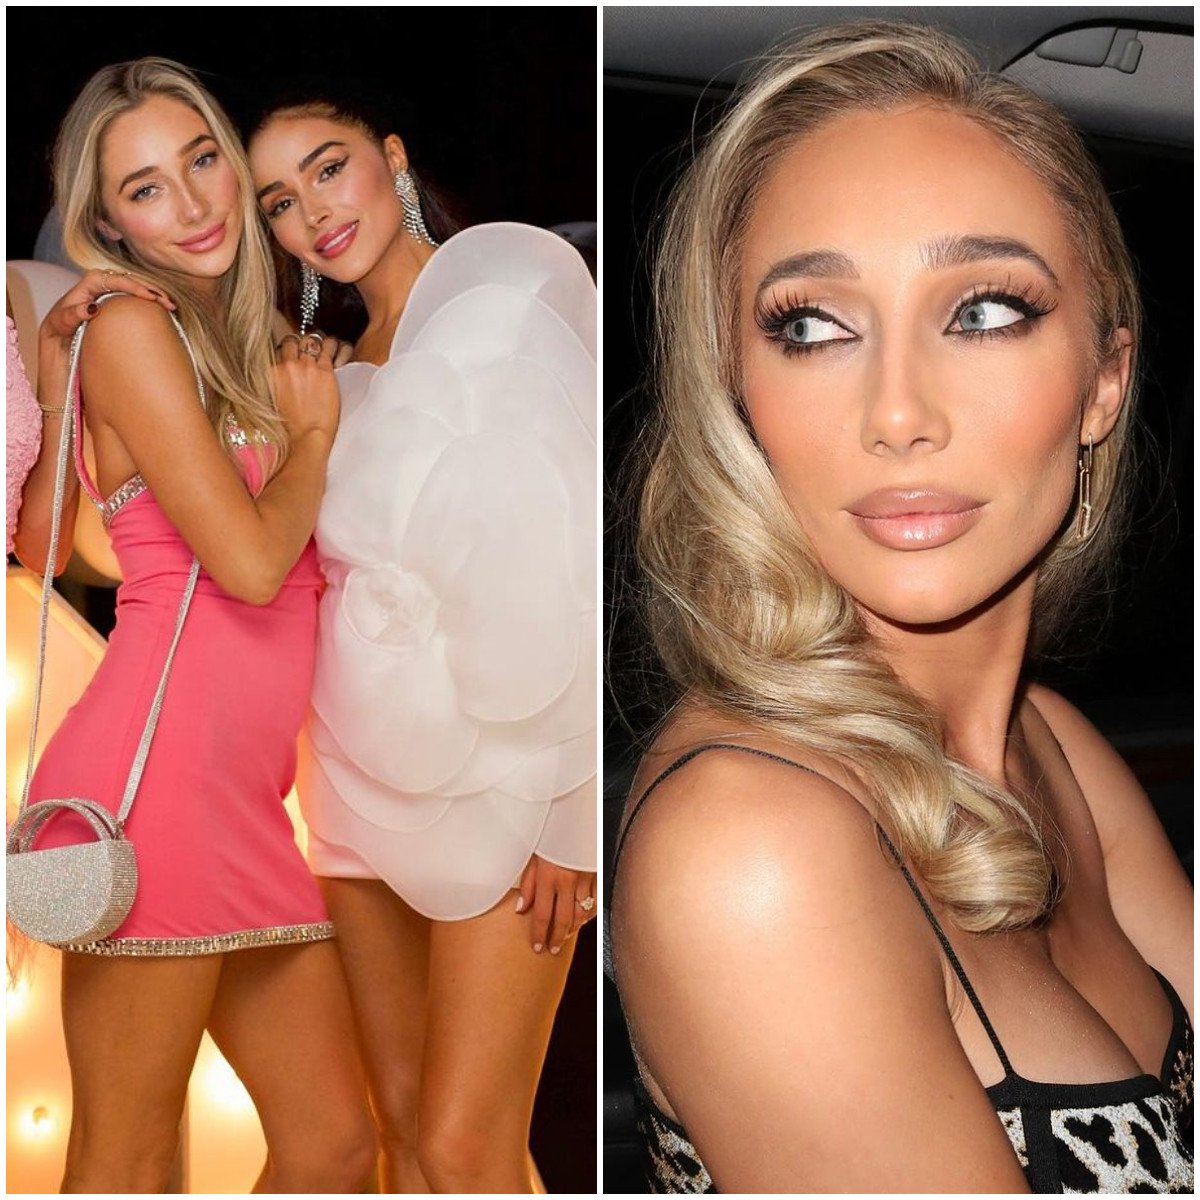 Meet Aurora Culpo, older sister to model and former Miss Universe Olivia Culpo – and now girlfriend to film producer Paul Bernon. Photos: @auroraculpo/Instagram